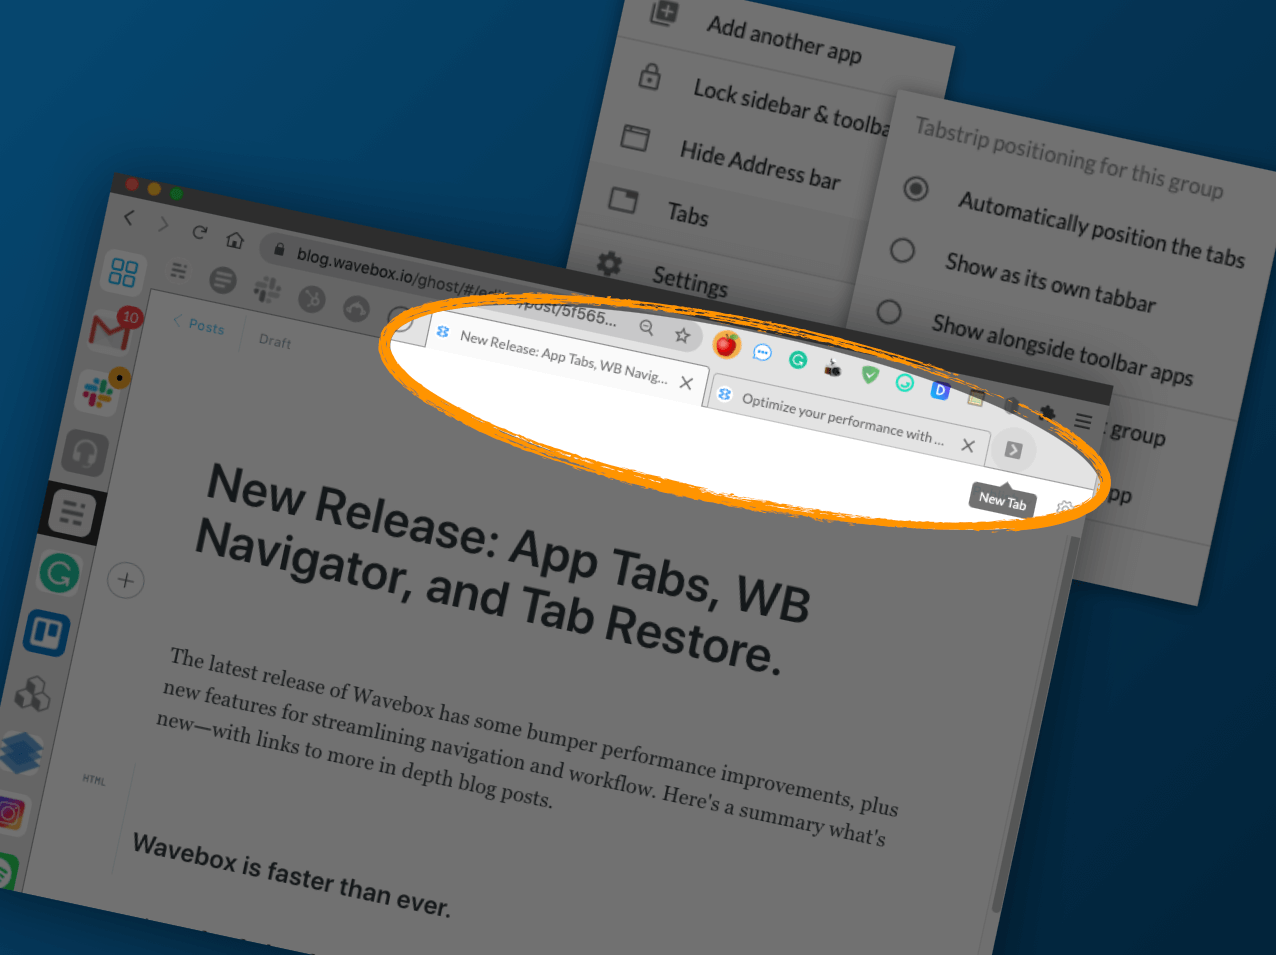 Speed up your Workflow with App Tabs.